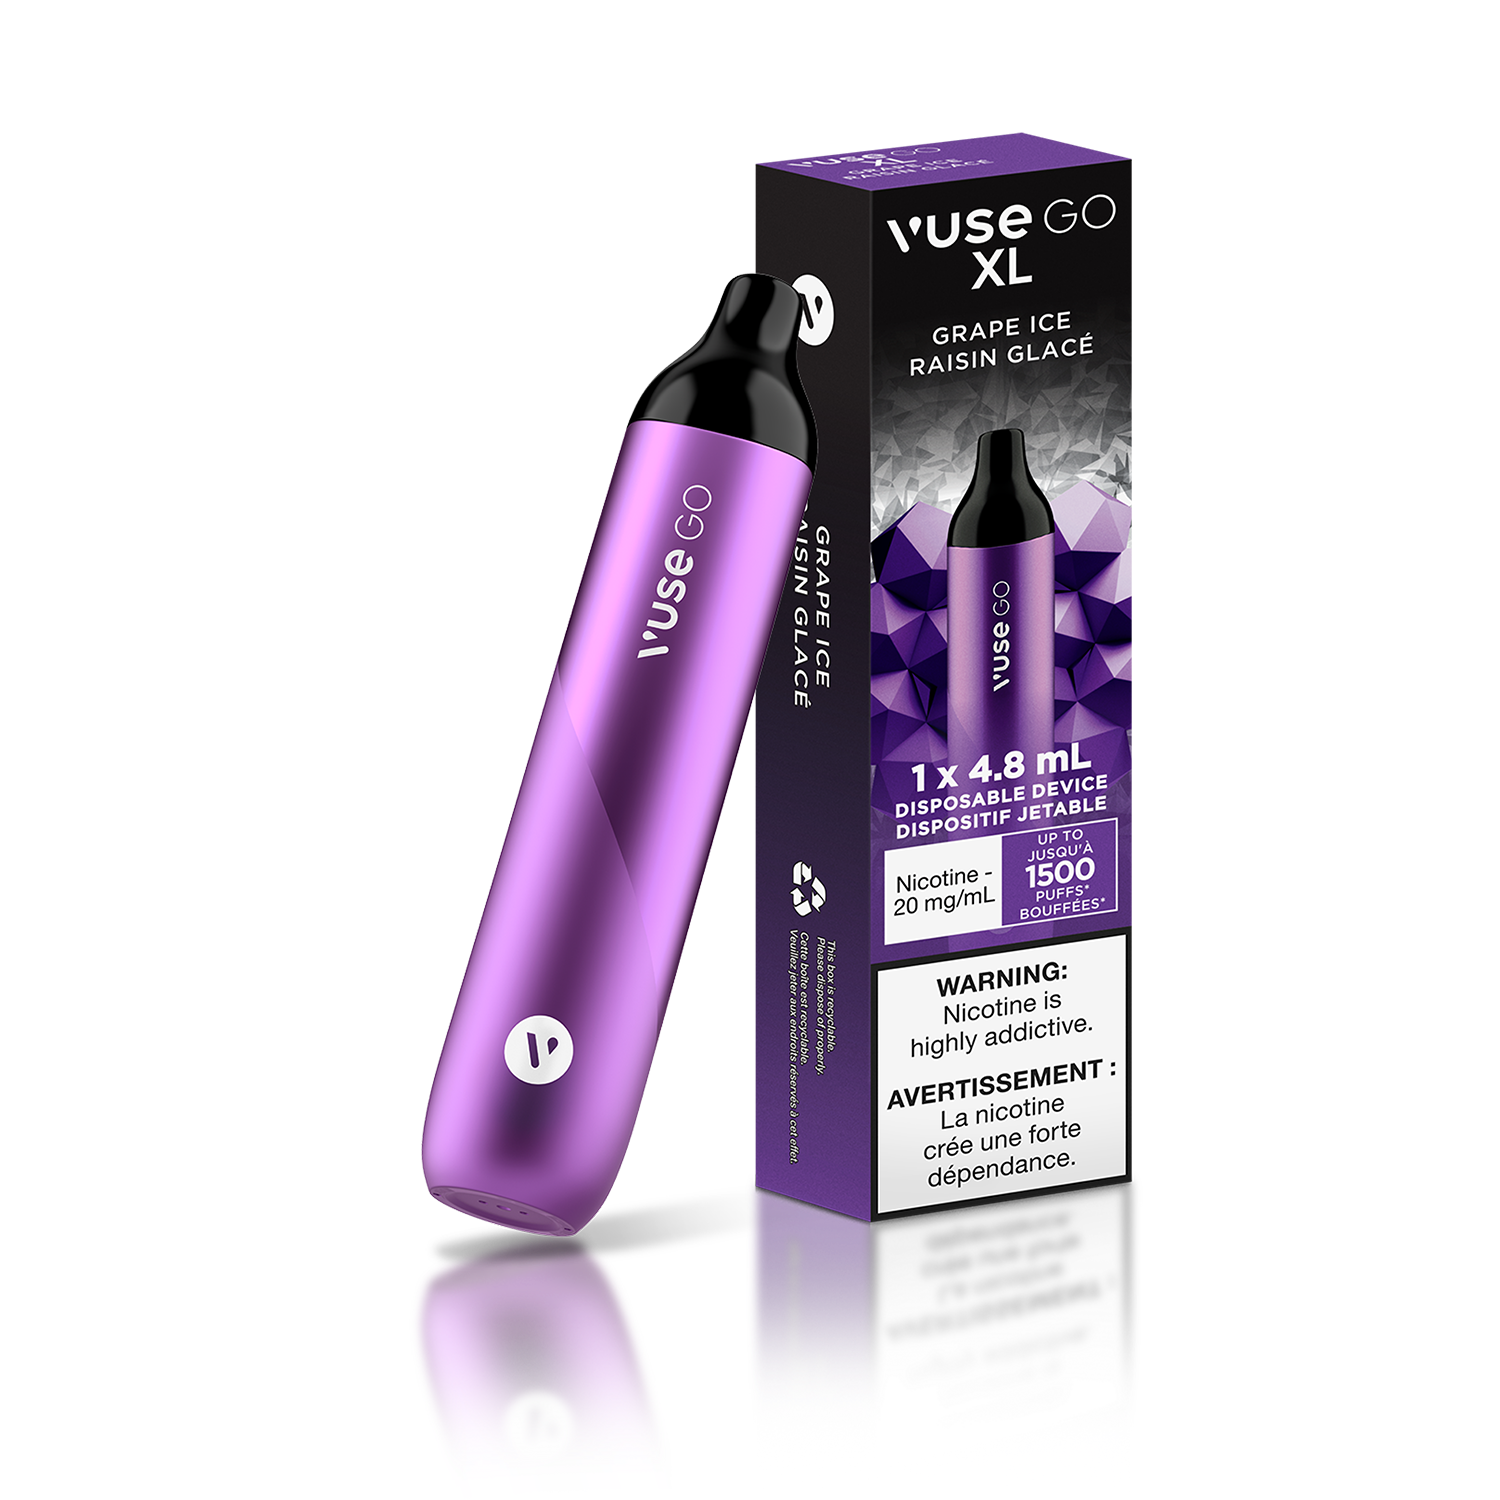 Vuse Vuse GO XL Grape Ice (Excise Taxed)